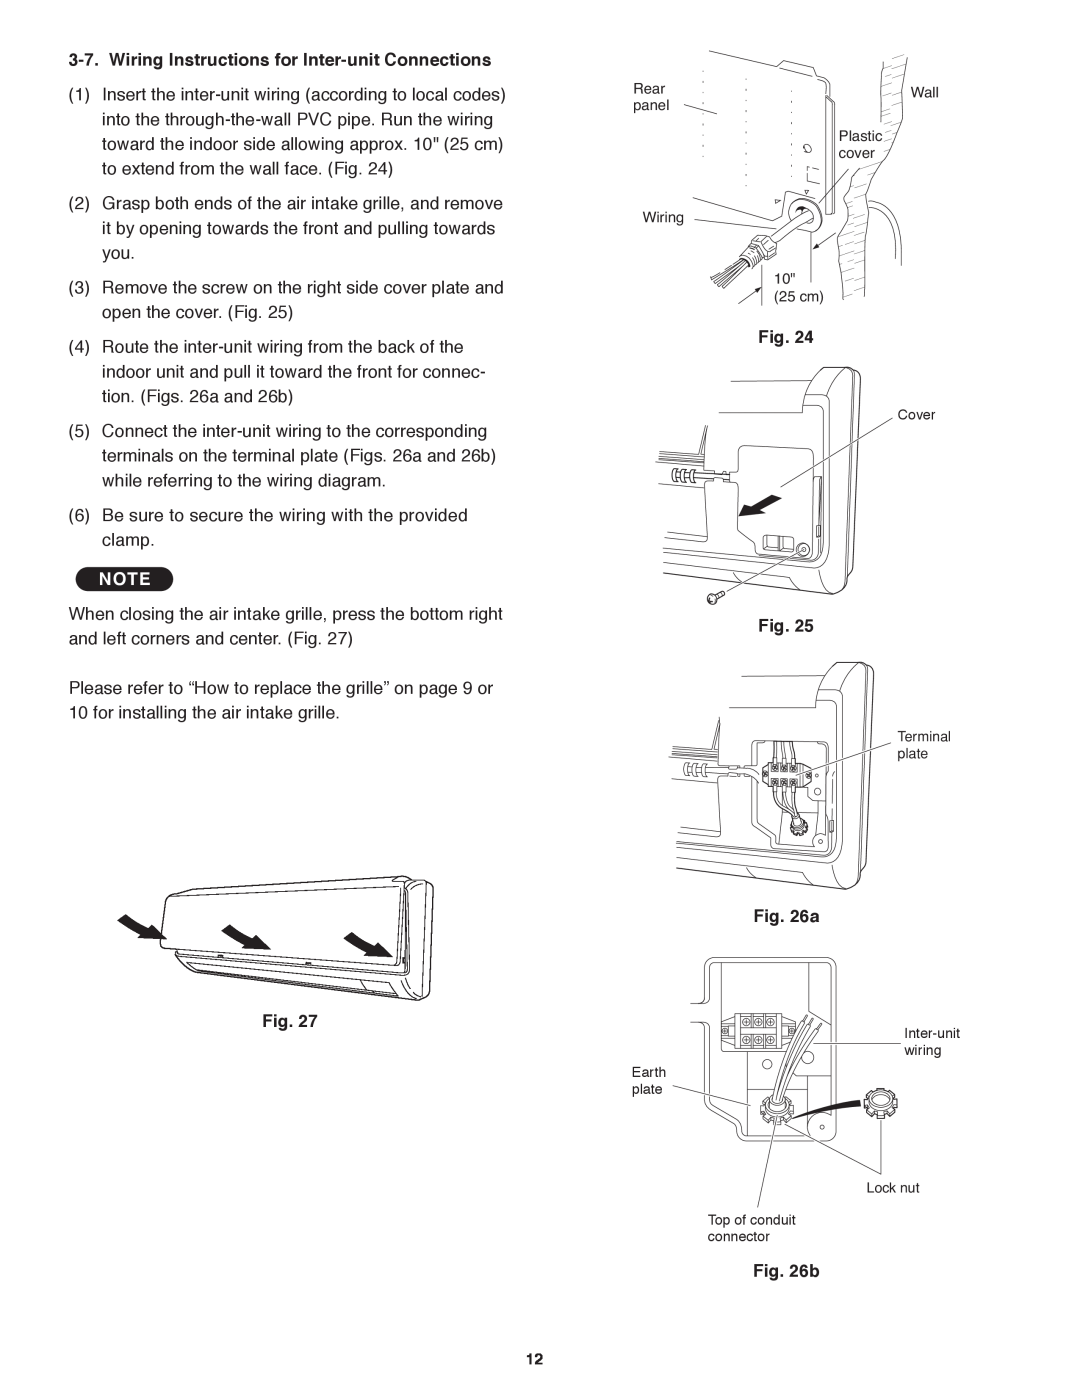 Panasonic CS-MKS24NKU, CS-MKS9NKU, CS-MKS18NKU service manual Wiring Instructions for Inter-unit Connections, b 